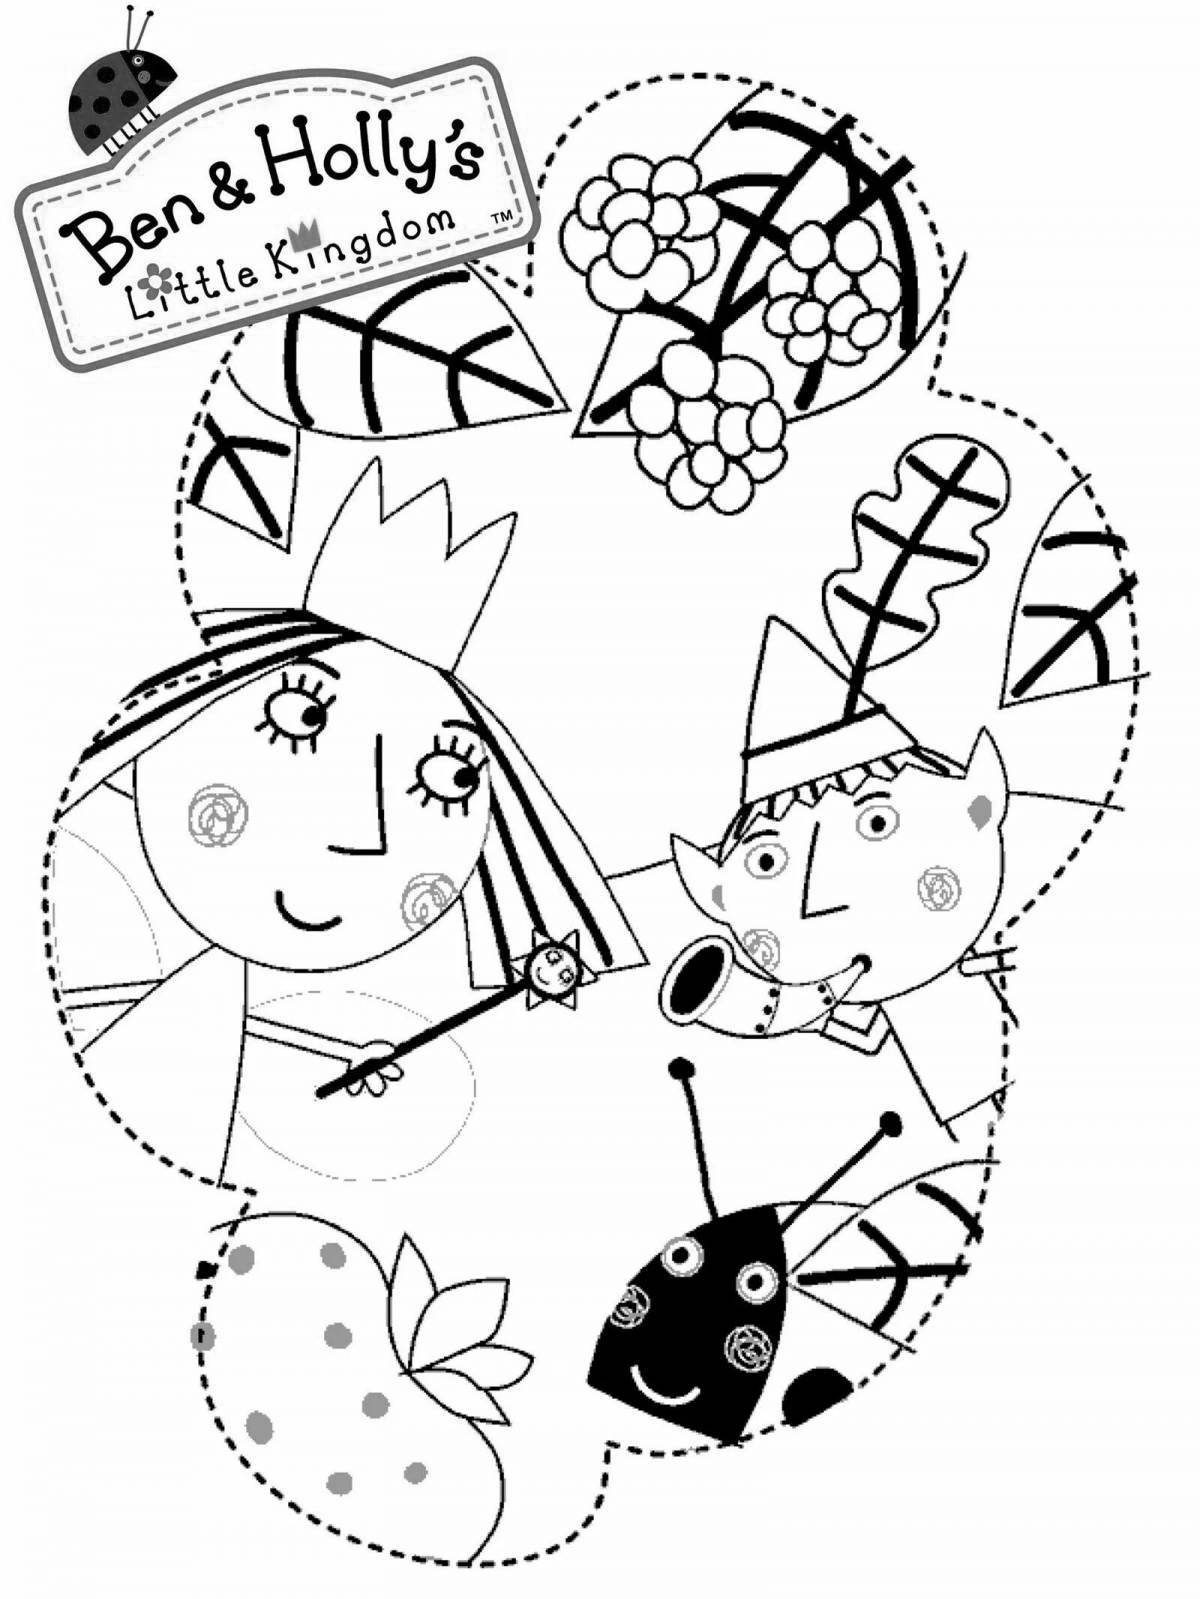 Cute ben and holly coloring book